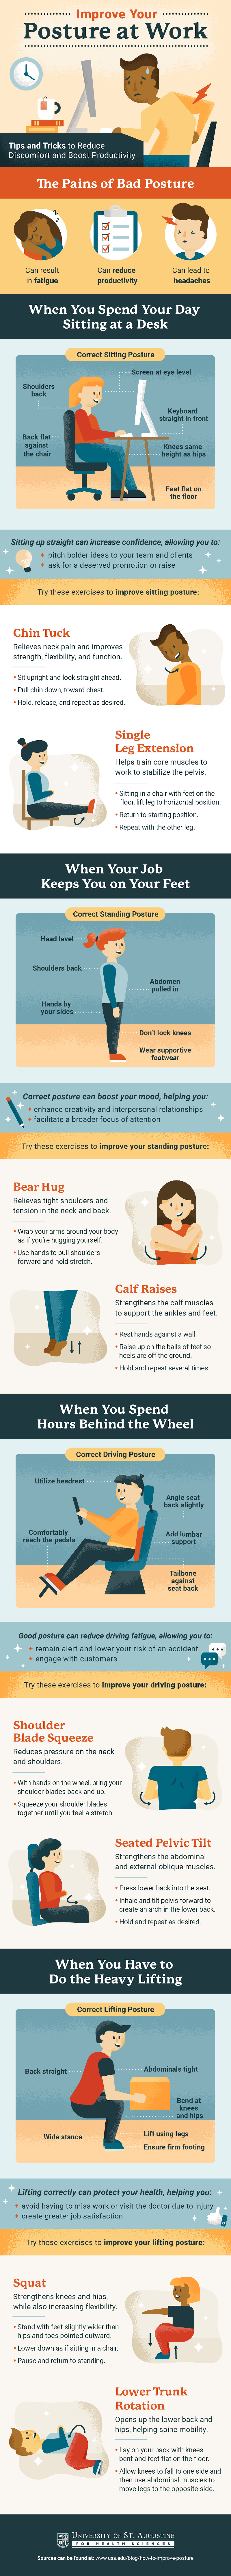 Tips to improve posture at work - infographic from usa.edu